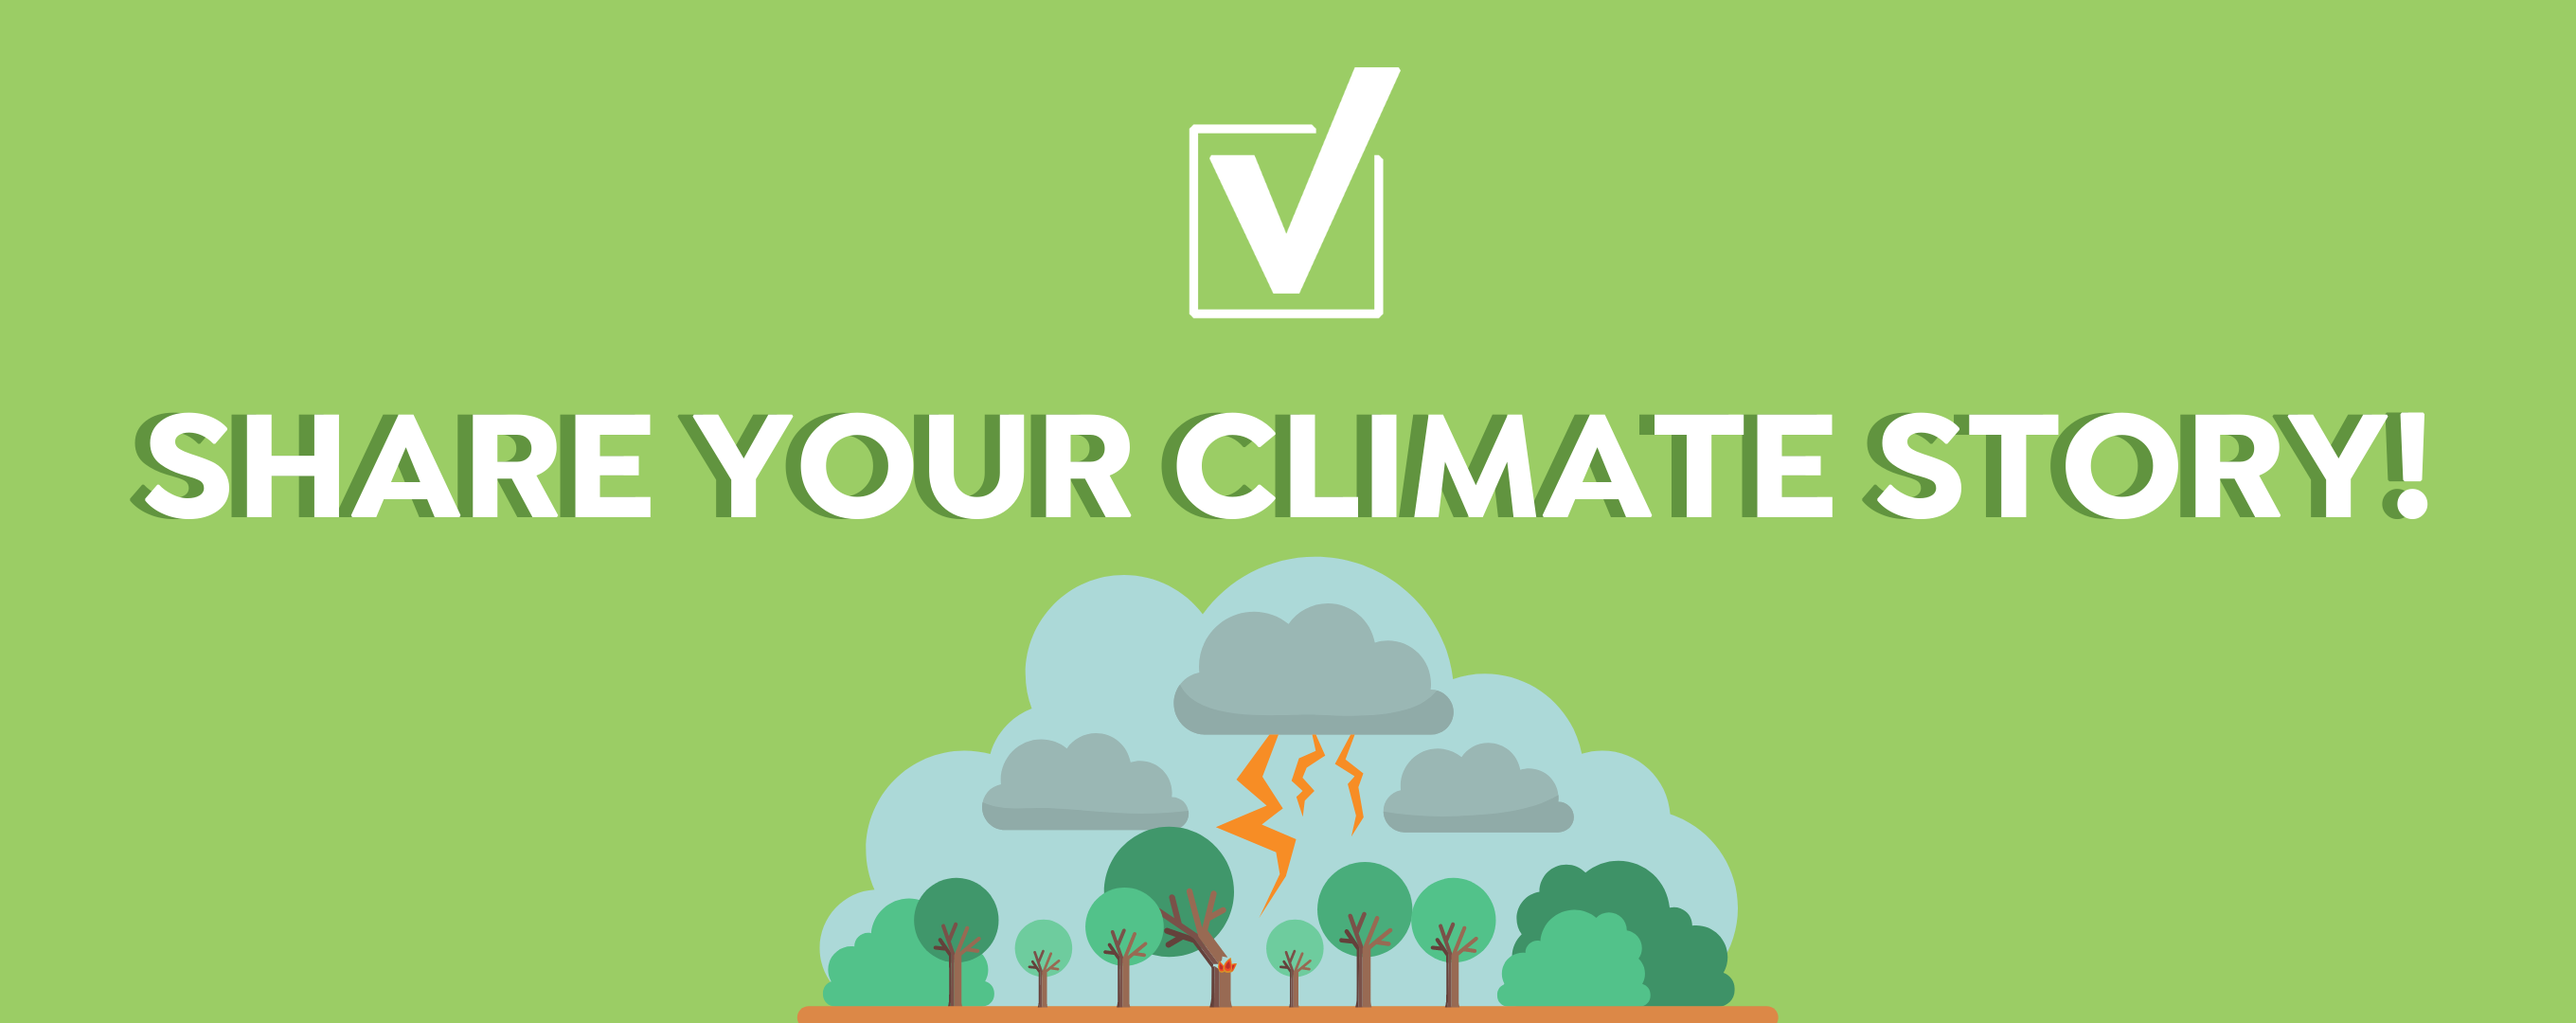 Share your climate story